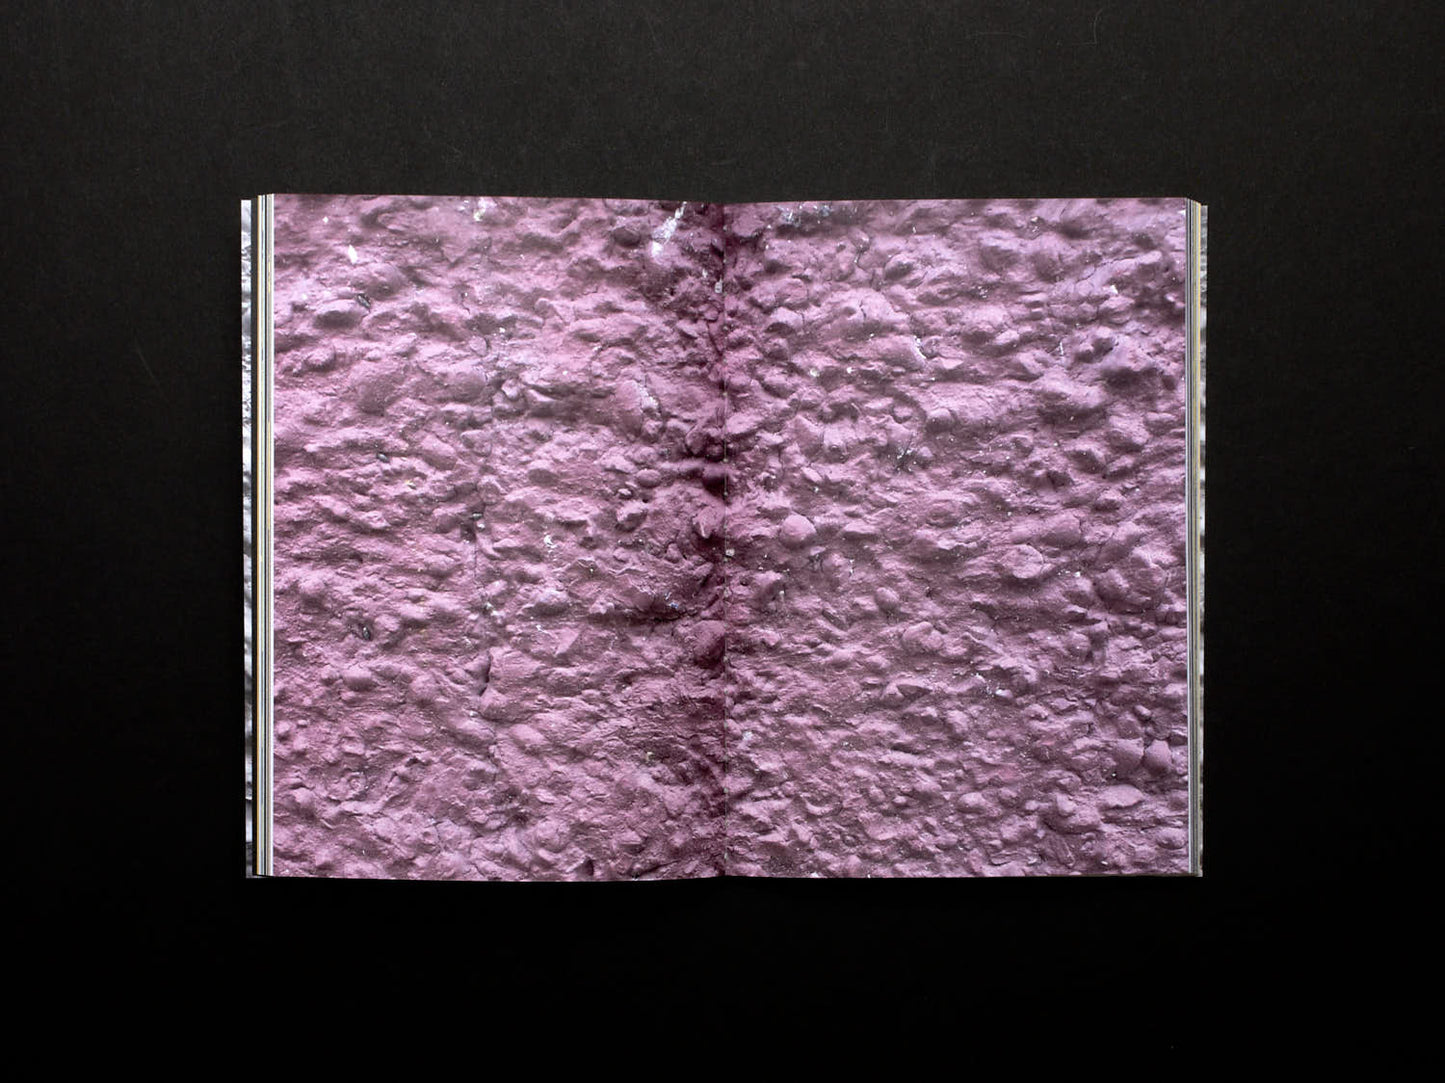 Roughcast, Issue 02